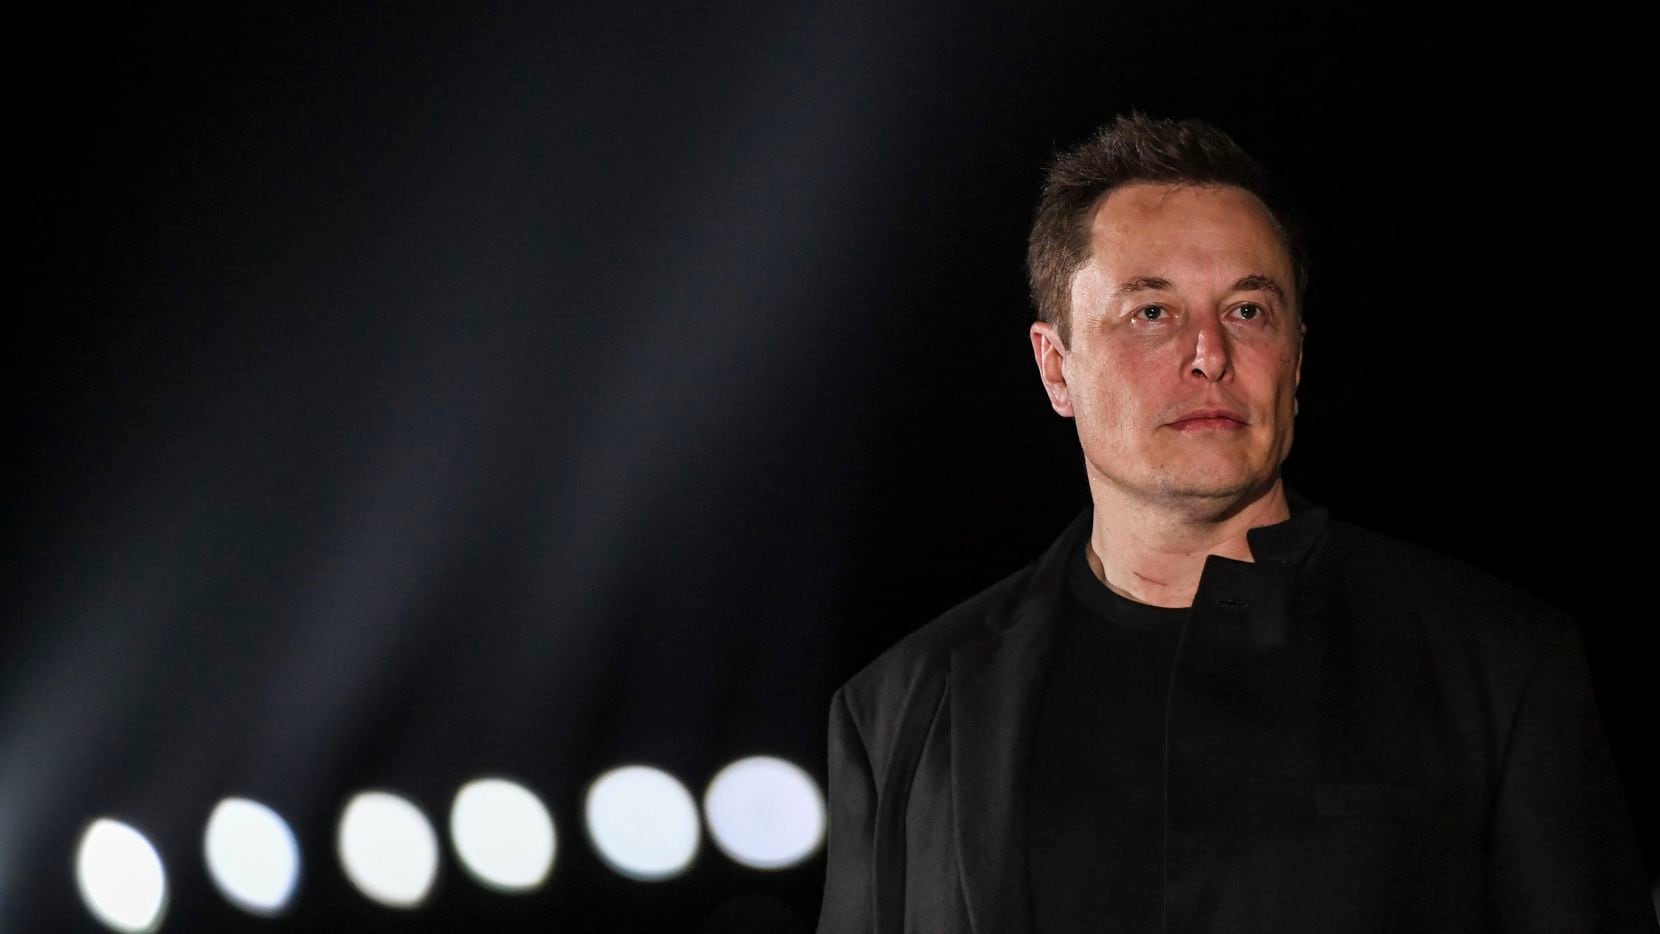 Tesla CEO Elon Musk has taken to Twitter to argue for an end to shelter-in-place orders. He...